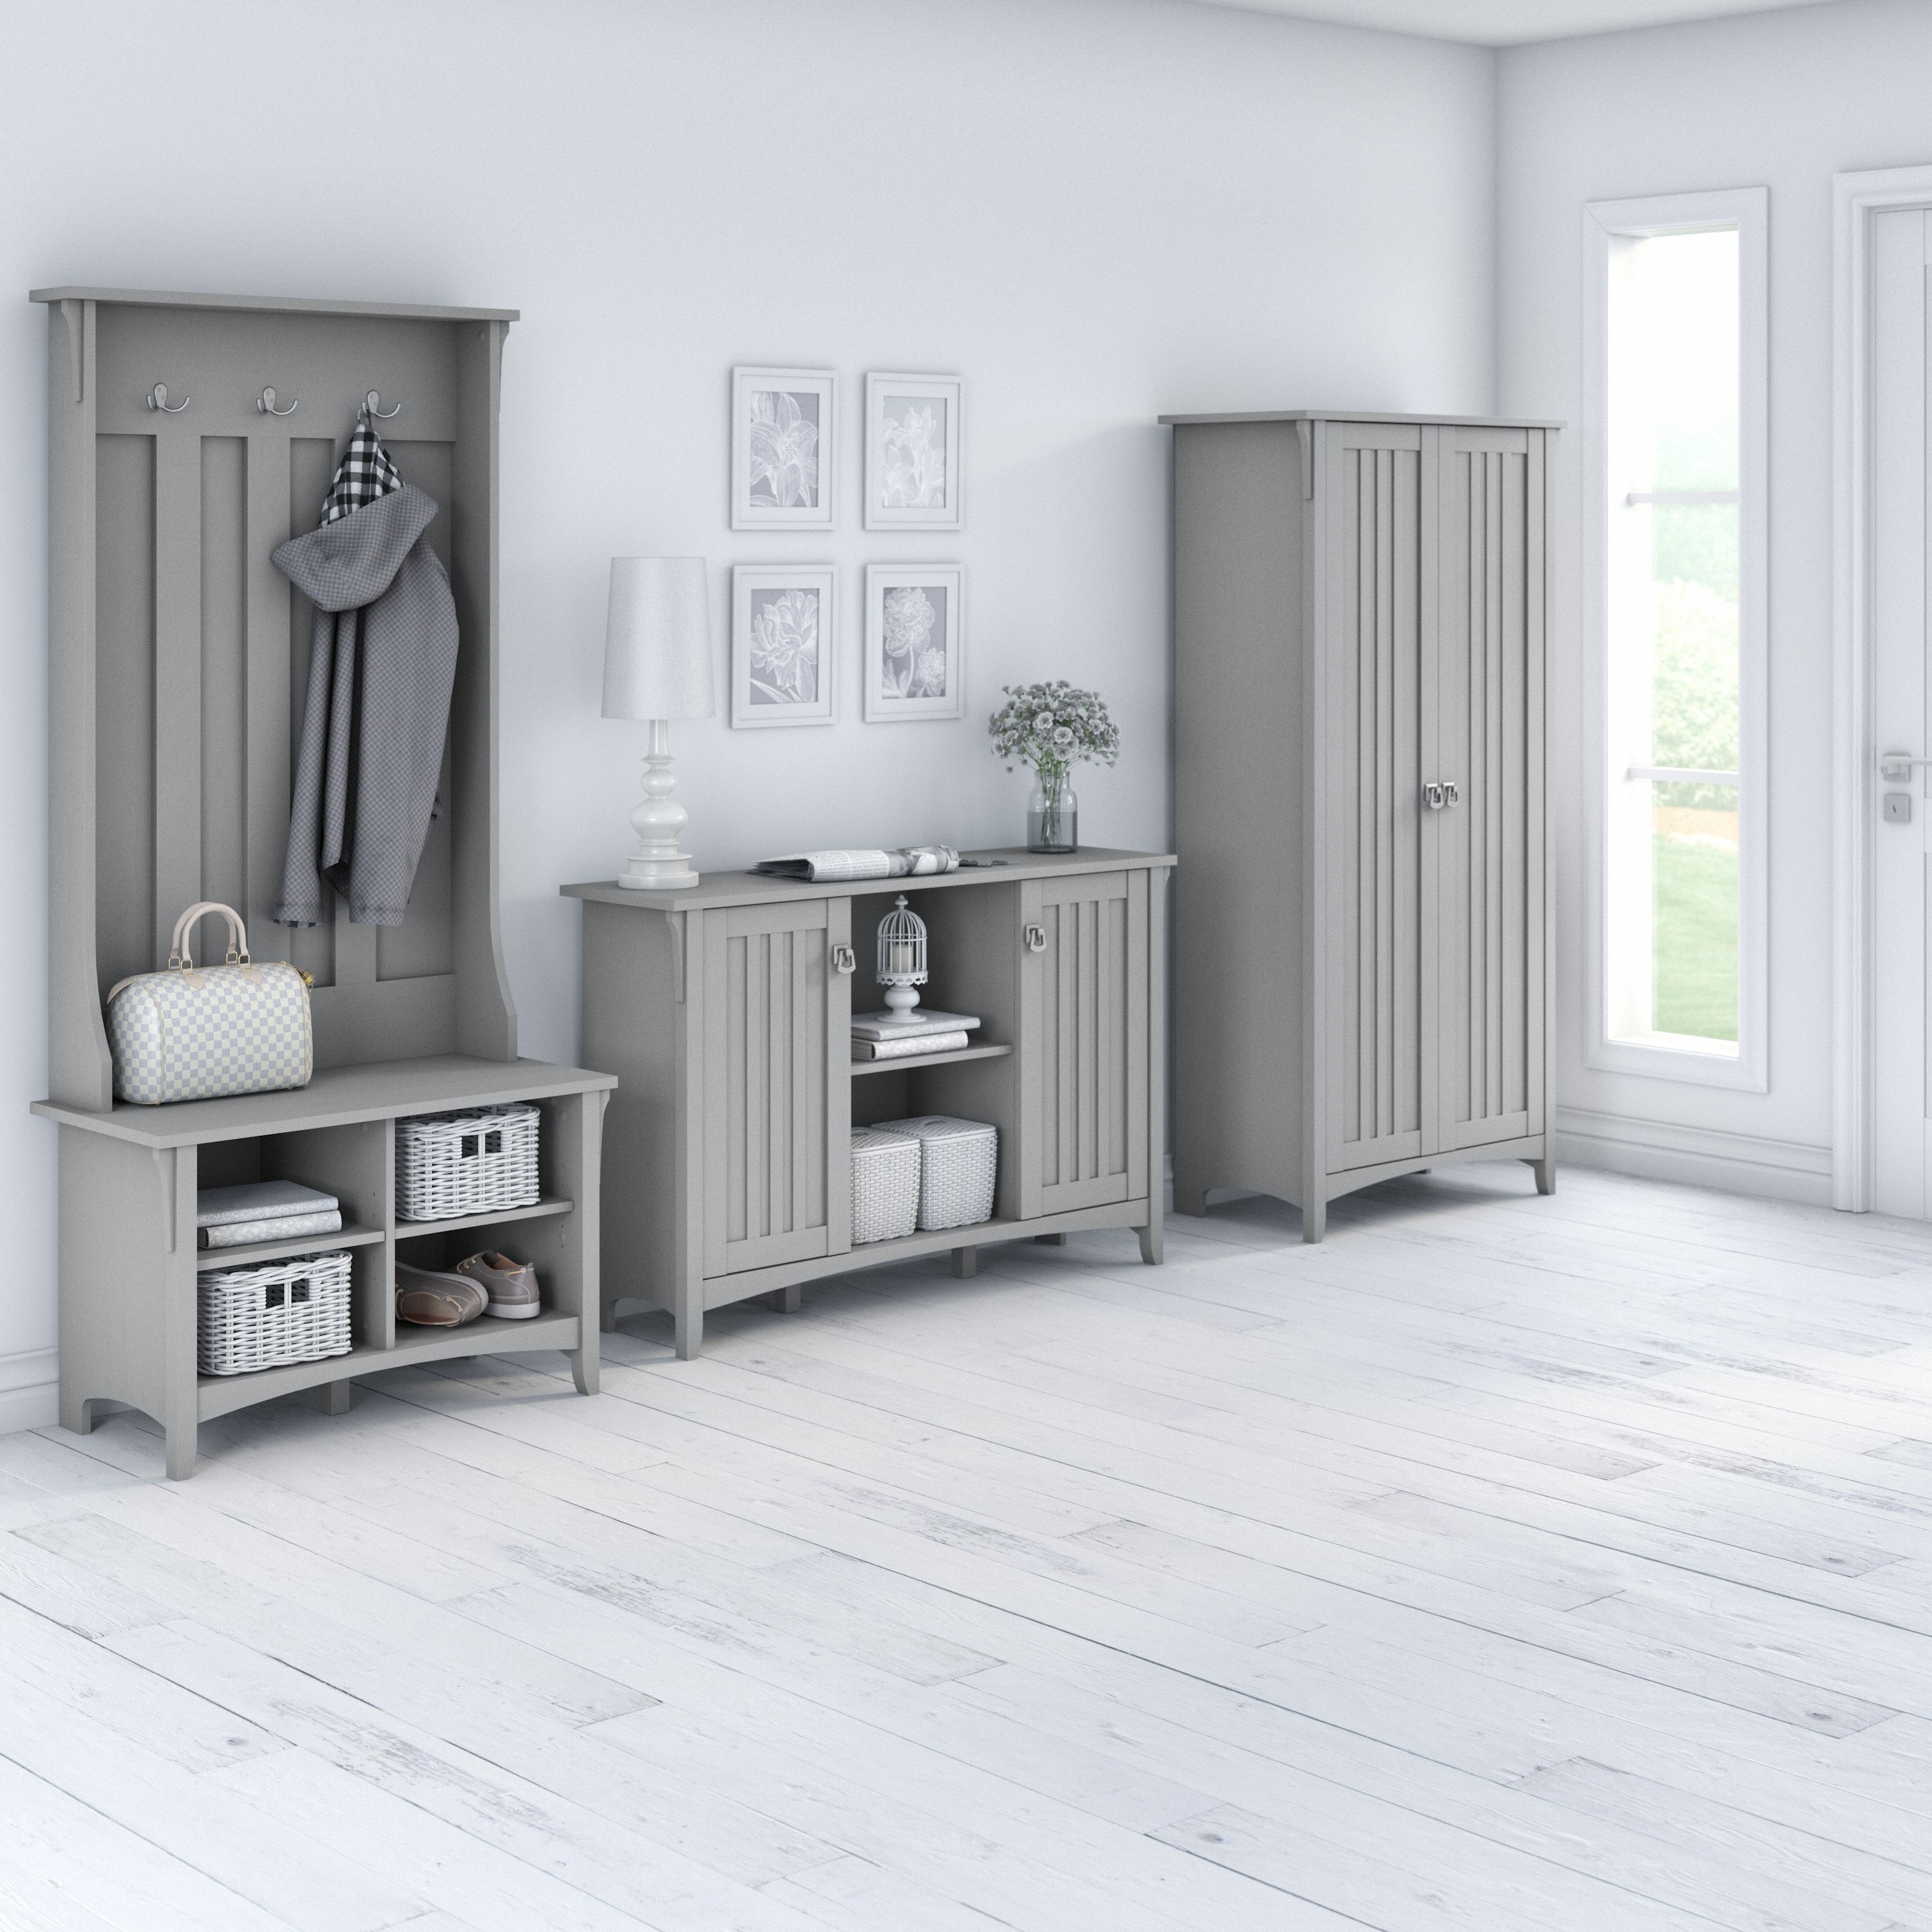 Shop Bush Furniture Salinas Entryway Storage Set with Hall Tree, Shoe Bench and Accent Cabinets 01 SAL016CG #color_cape cod gray